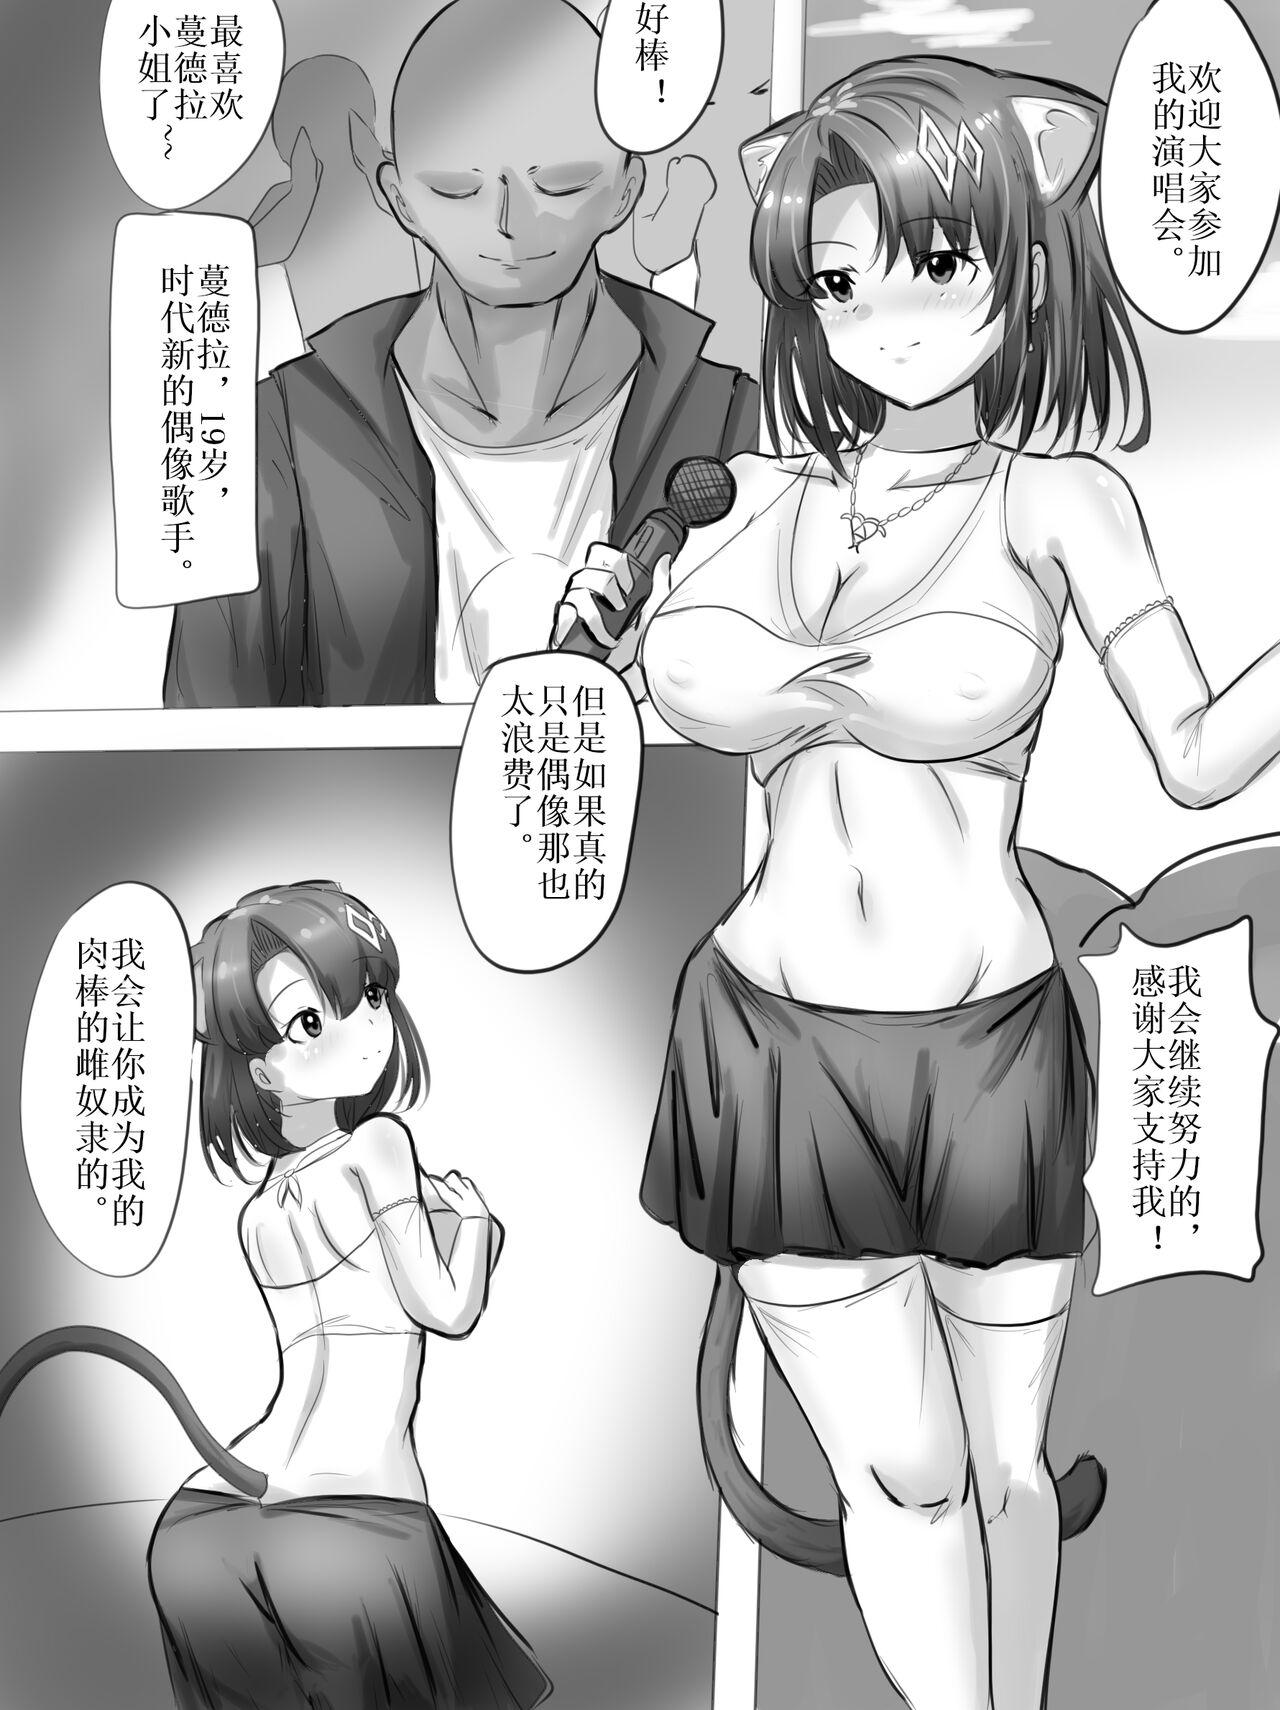 Mommy 未偿の音 Stone of Desire - Arknights Camgirls - Page 4